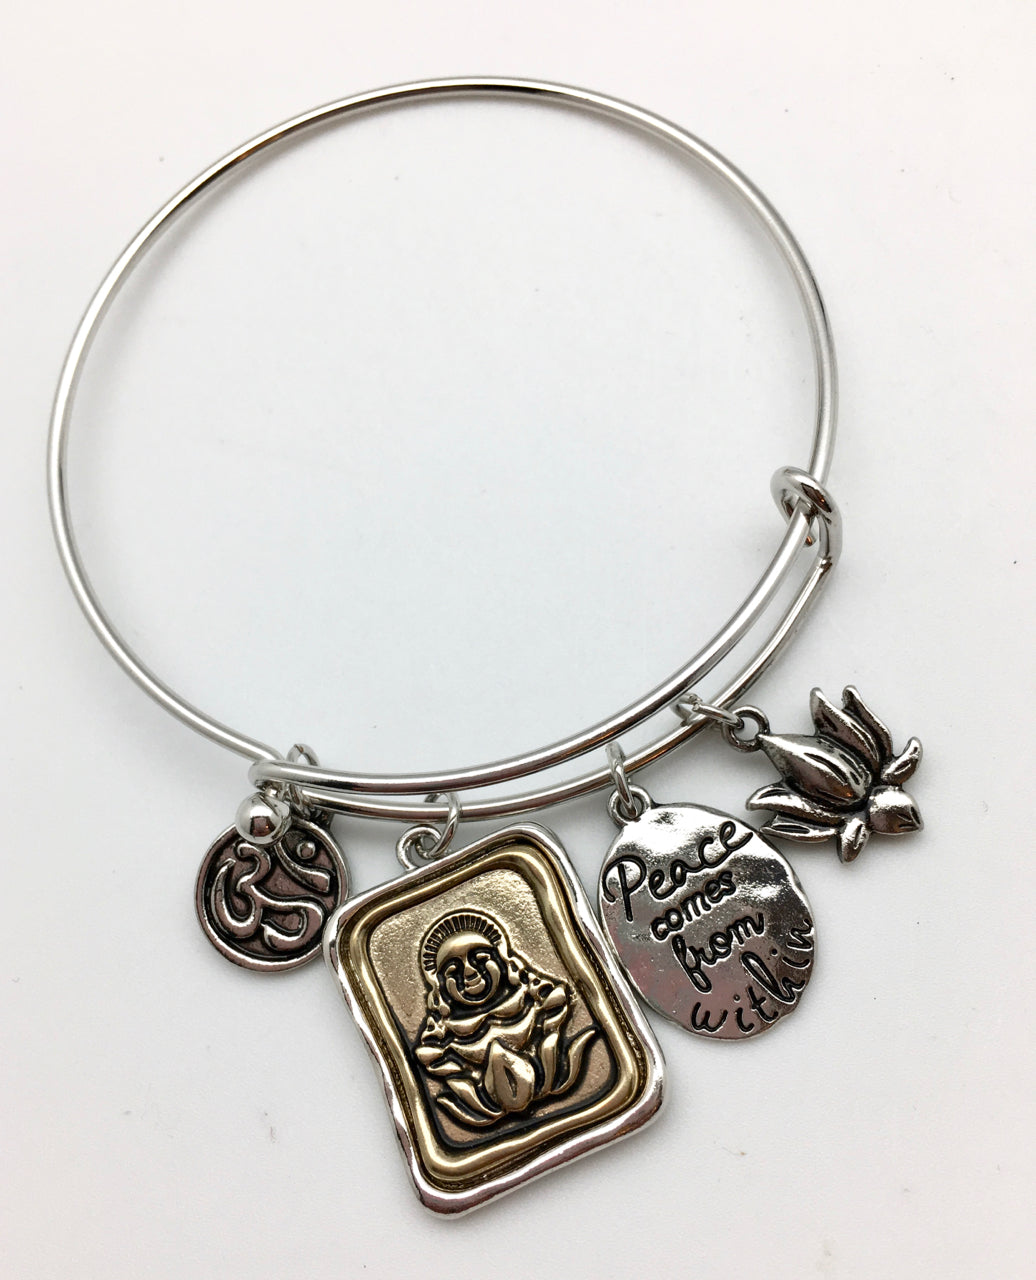 Peace Comes From Within Bangle Bracelet with Buddha and Om Charms